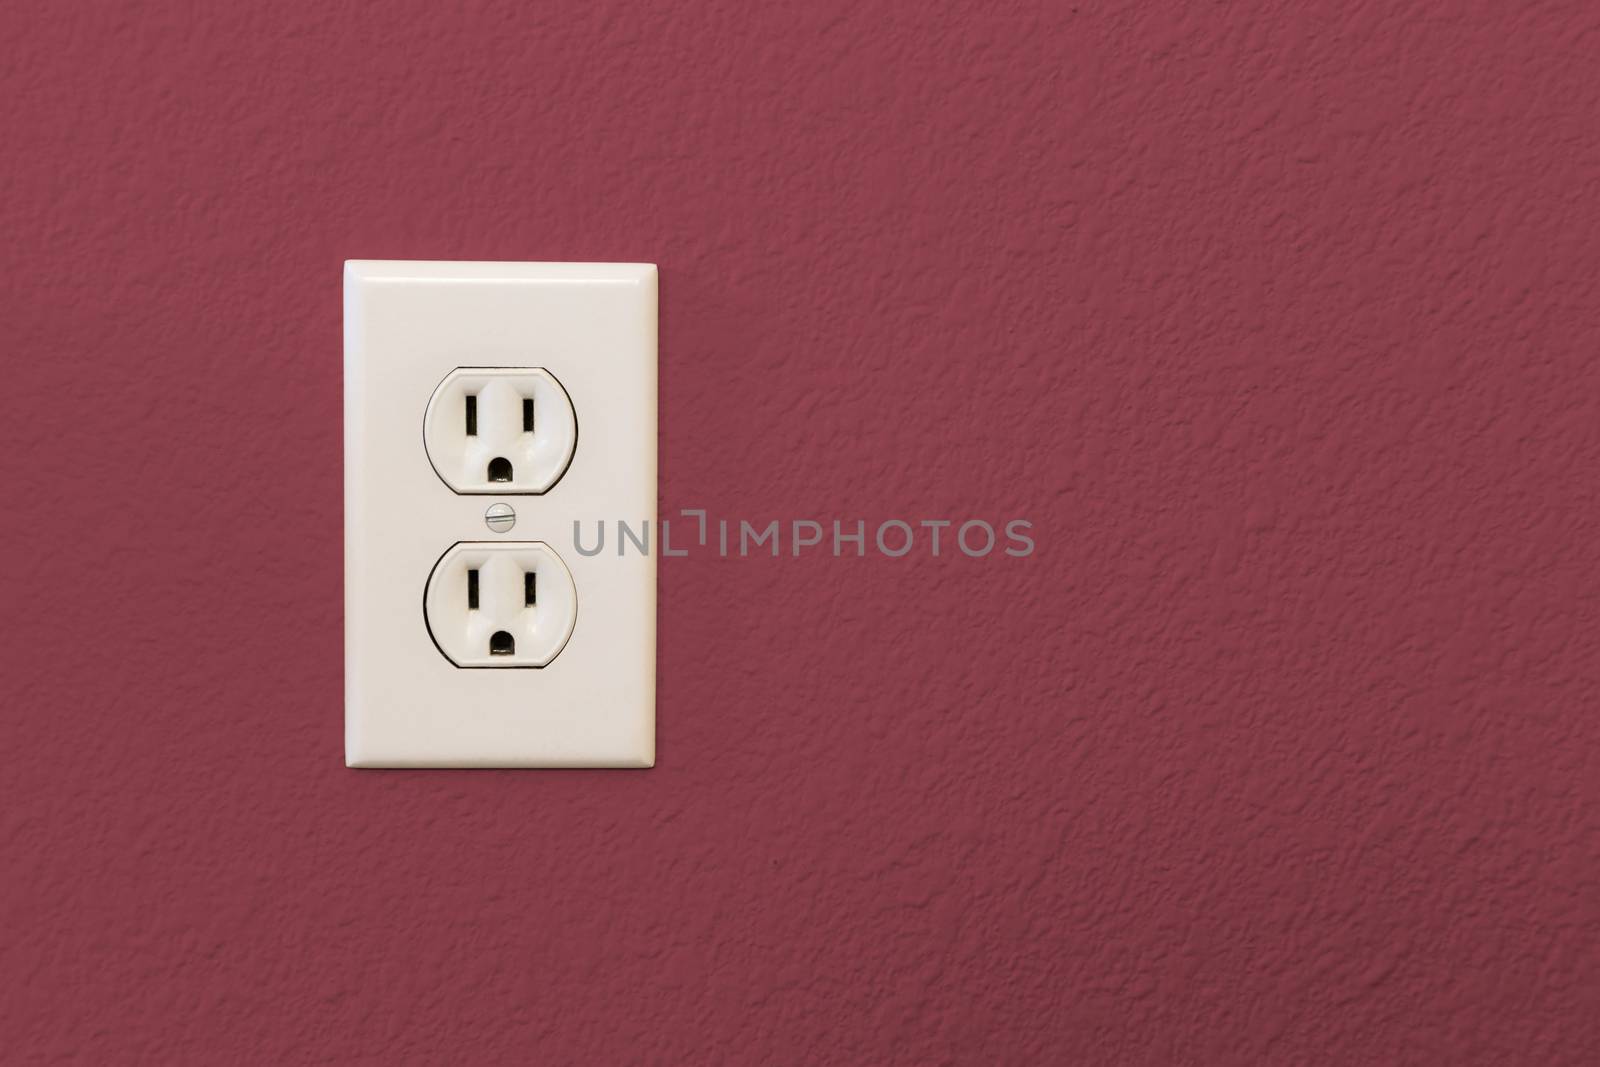 Electrical Sockets In Colorful Burgundy Wall of House.